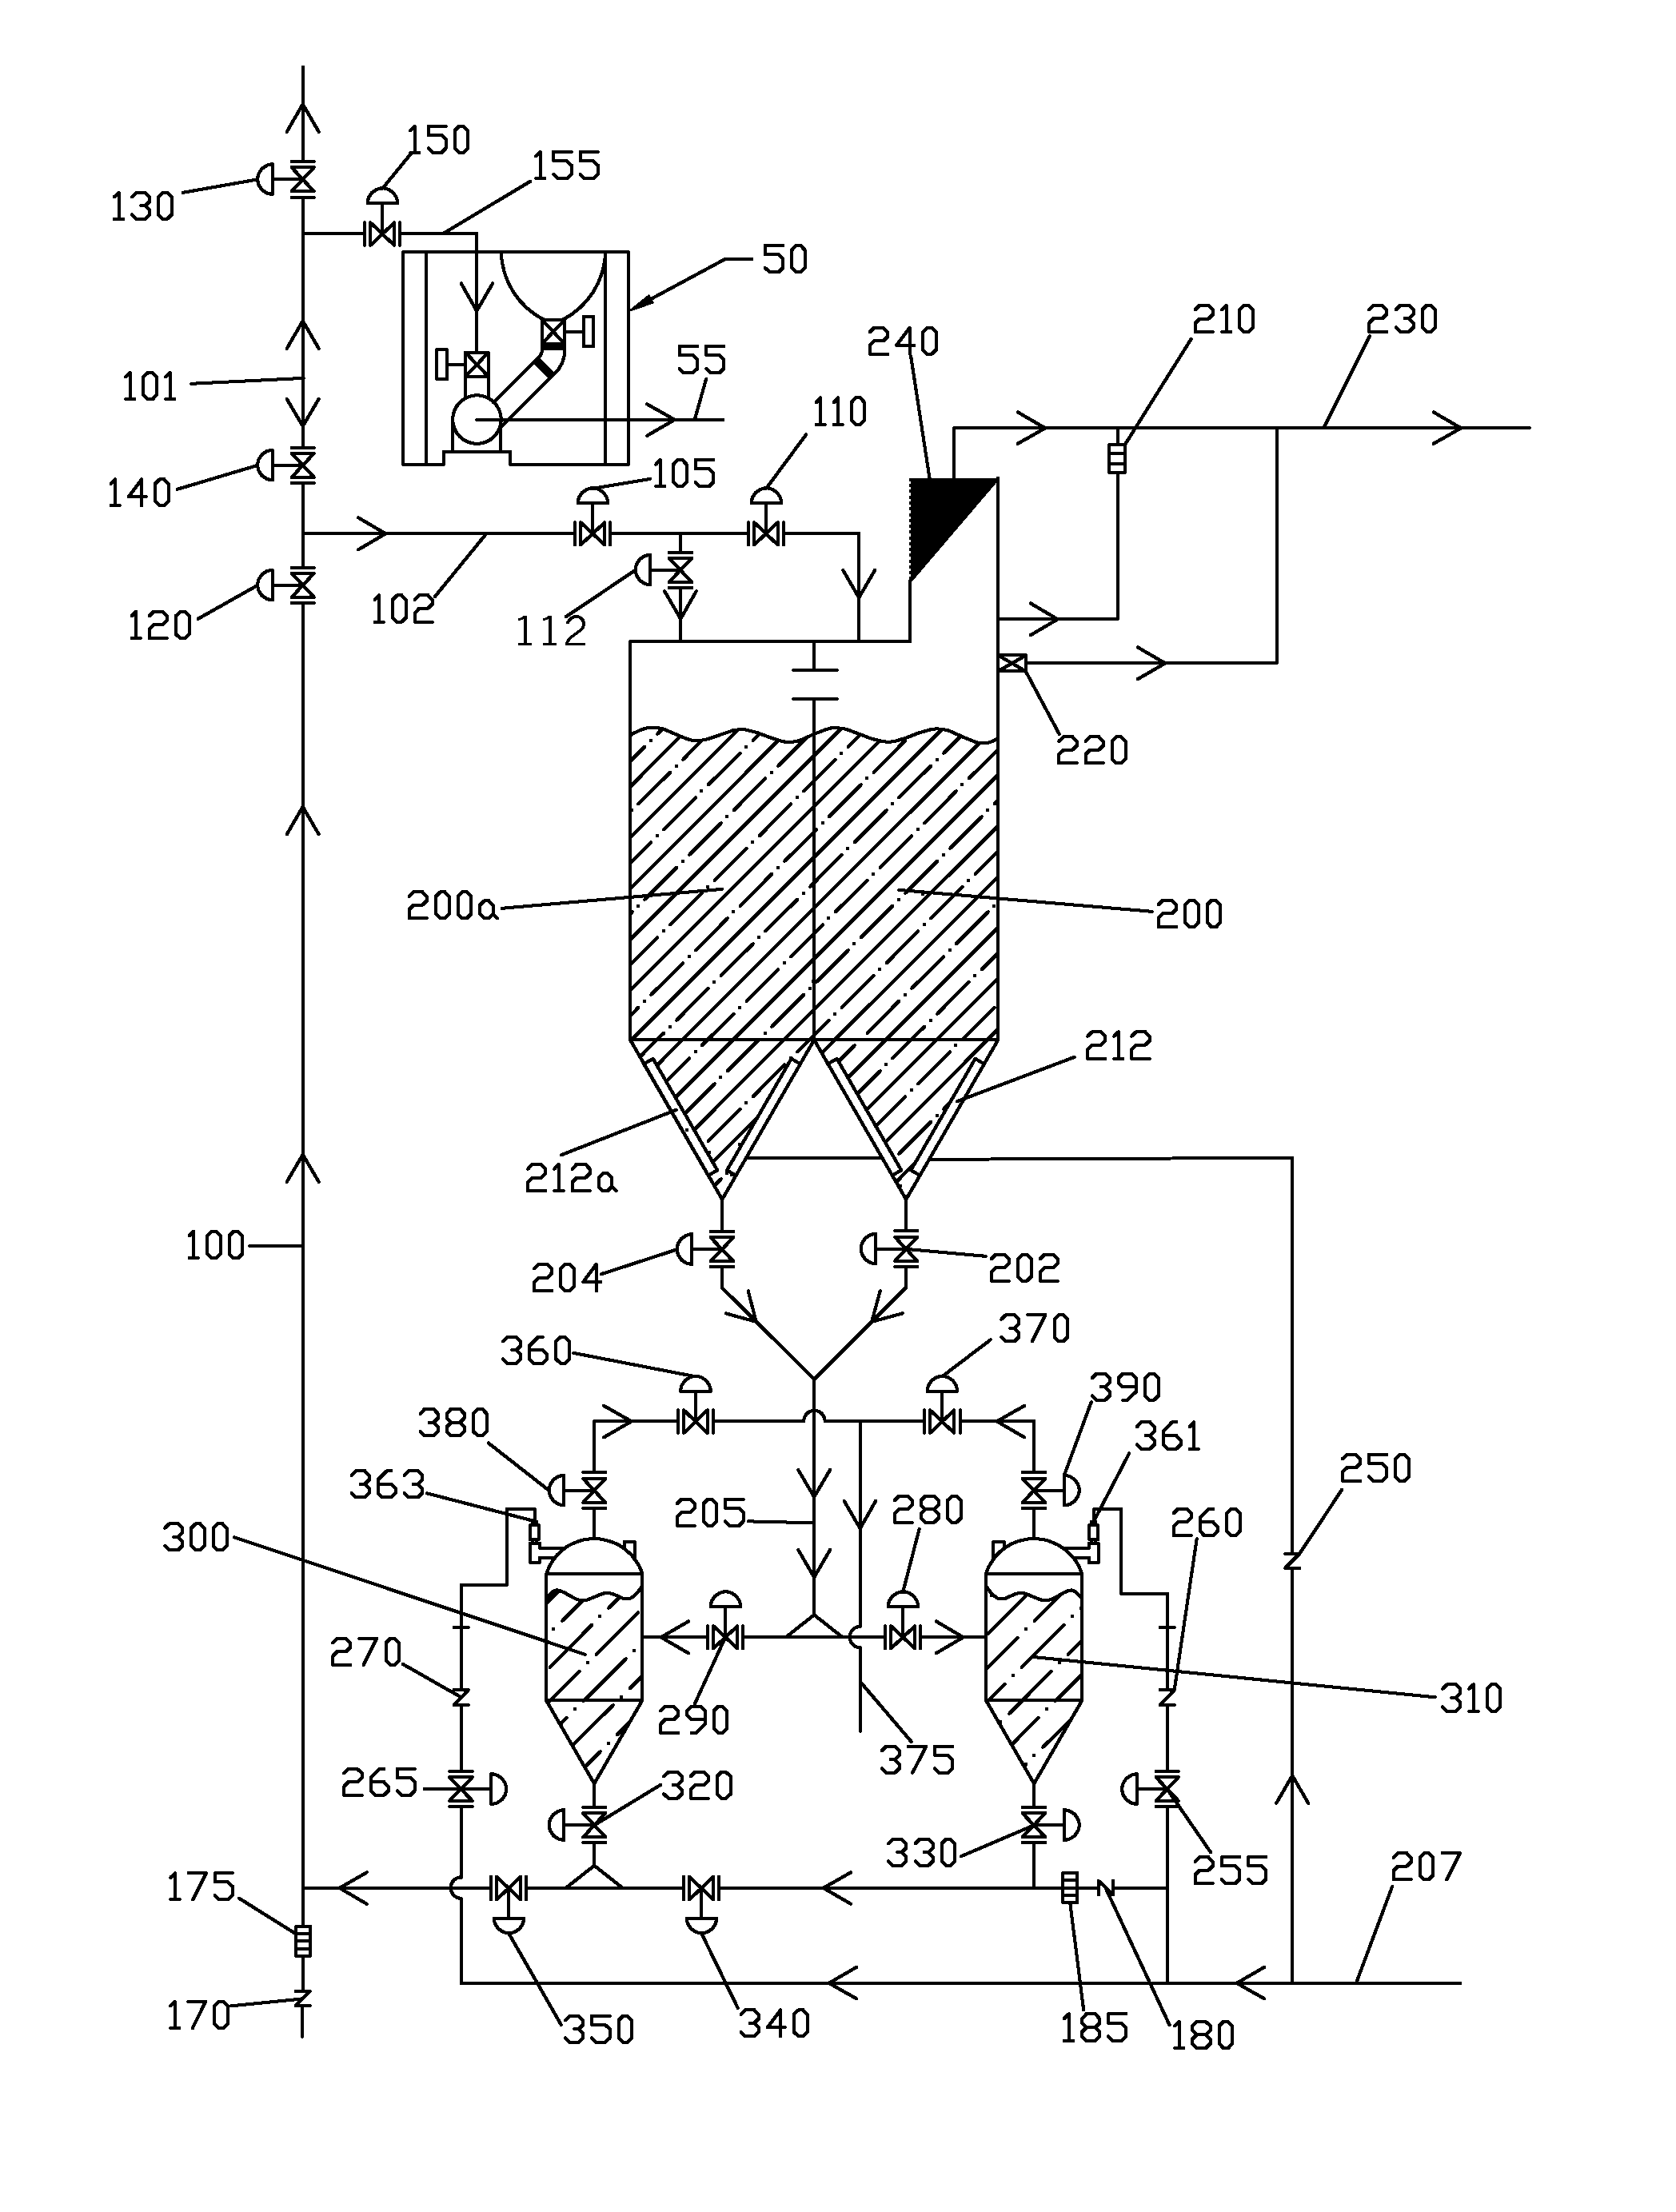 Accurate dry bulk handling system and method of use